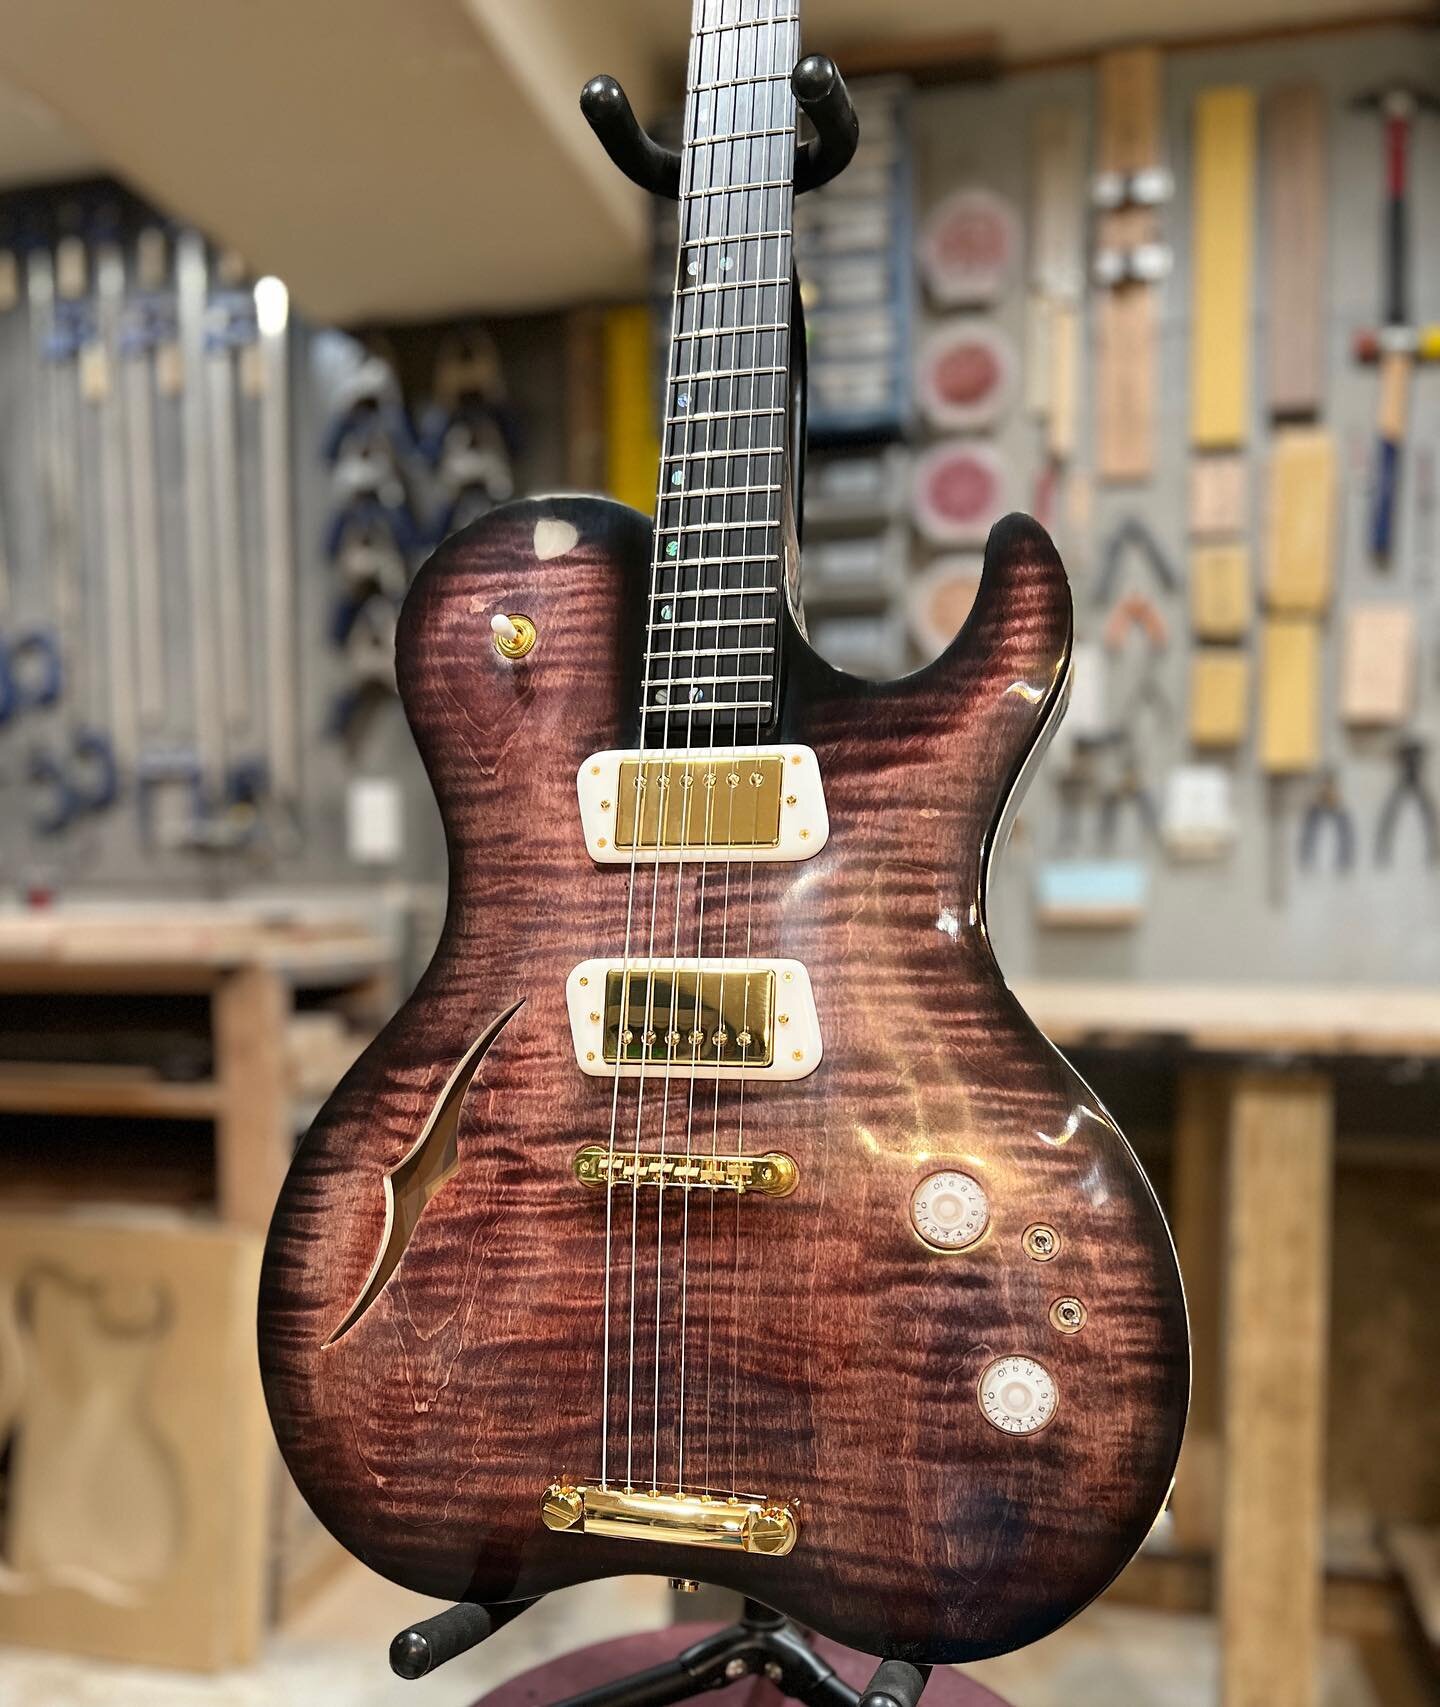 All Howie guitars are 20% off right now on reverb.com.